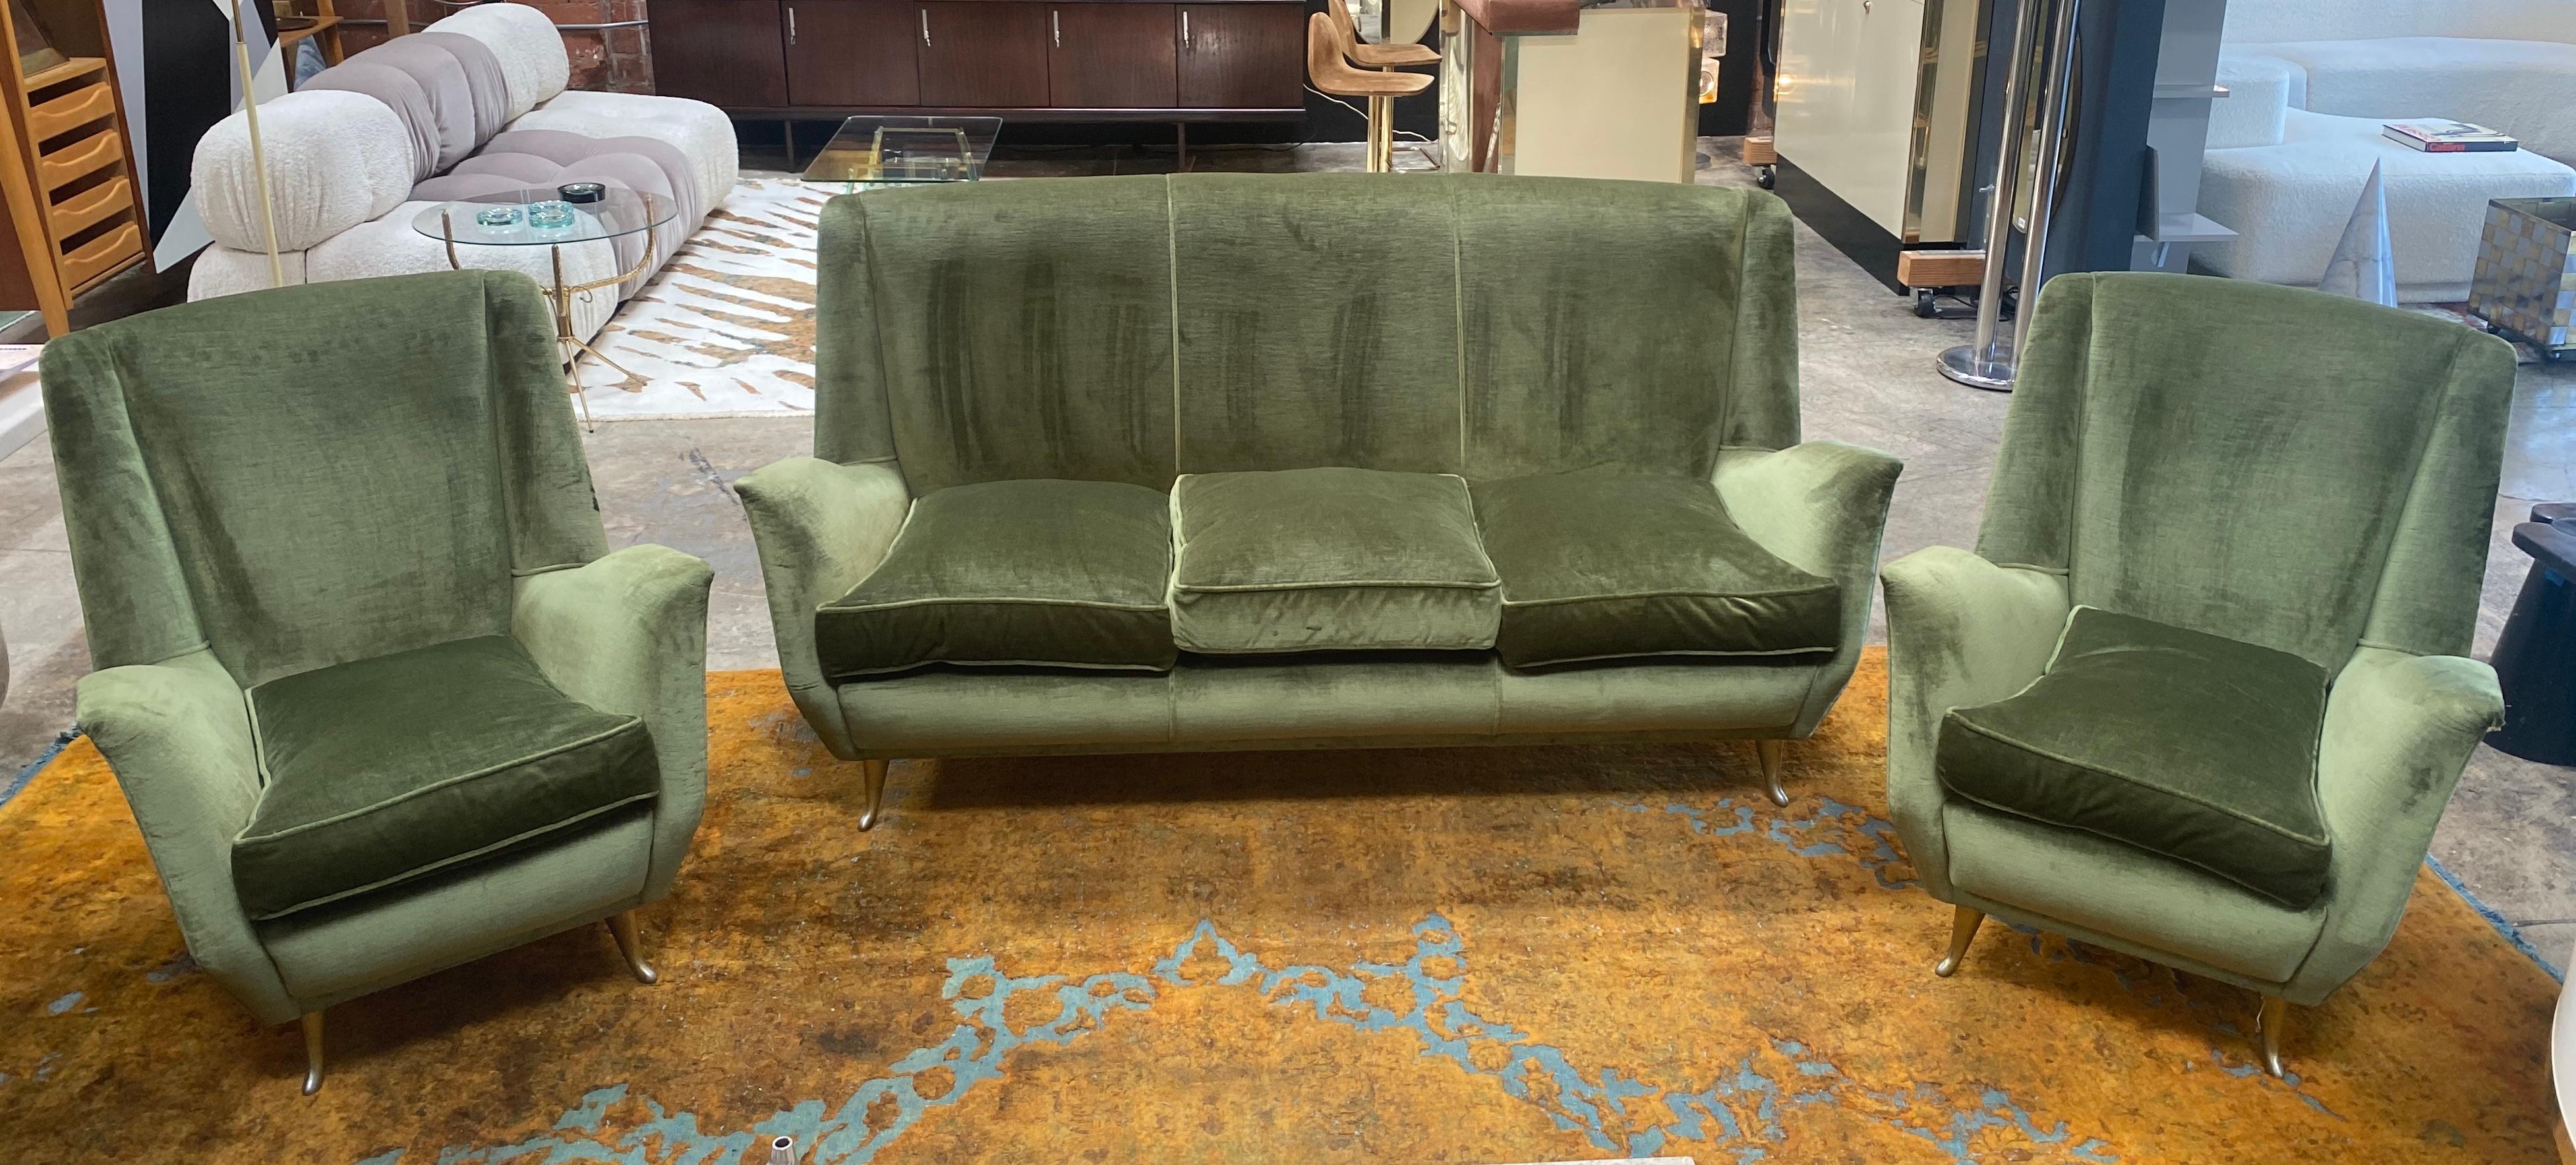 An elegant, stunning Italian Mid-Century Modern Sofa by ISA, Bergamo, 1955 including a pair of armchairs / lounge chairs / wingback / high back chairs and a sofa / couch. It is rare to find an entire set of pieces in original condition by a master